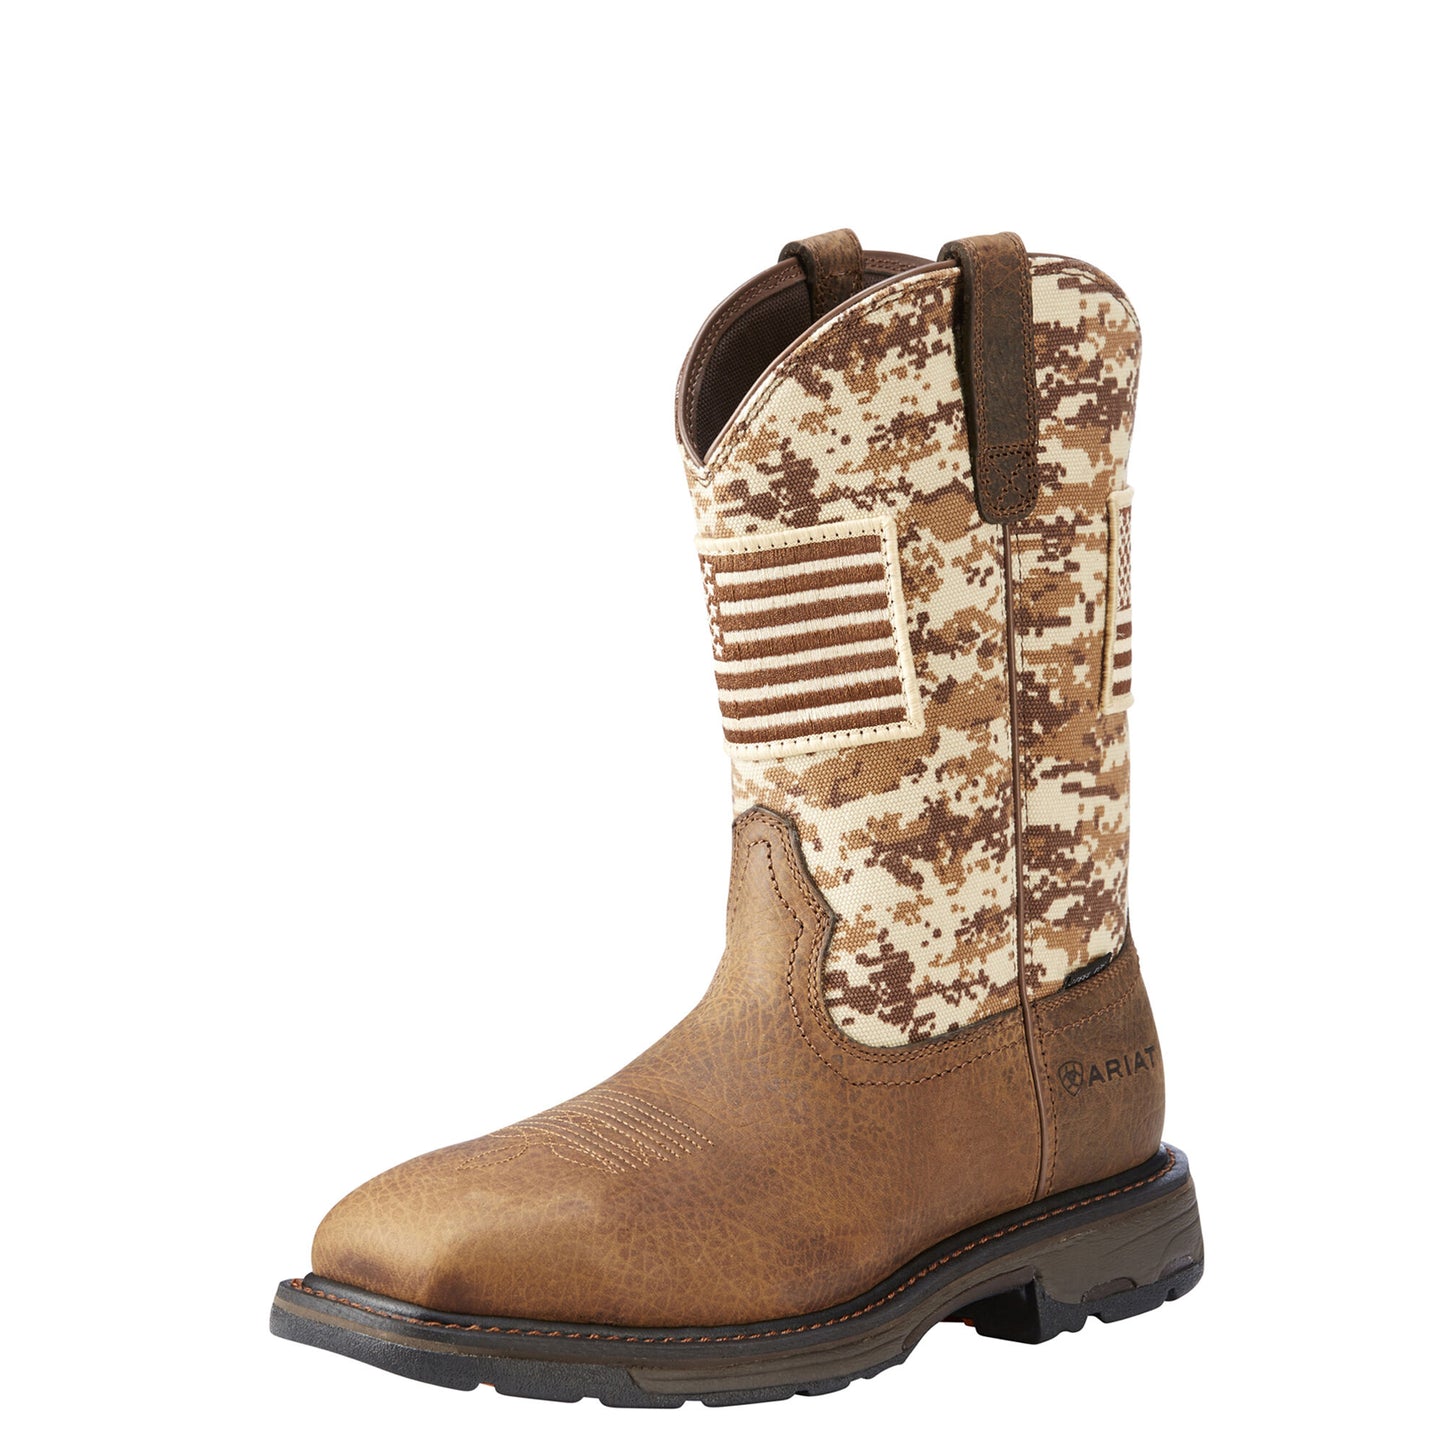 Ariat Men's WorkHog Patriot Steel Toe Boot - Earth/Sand Camo - French's Boots